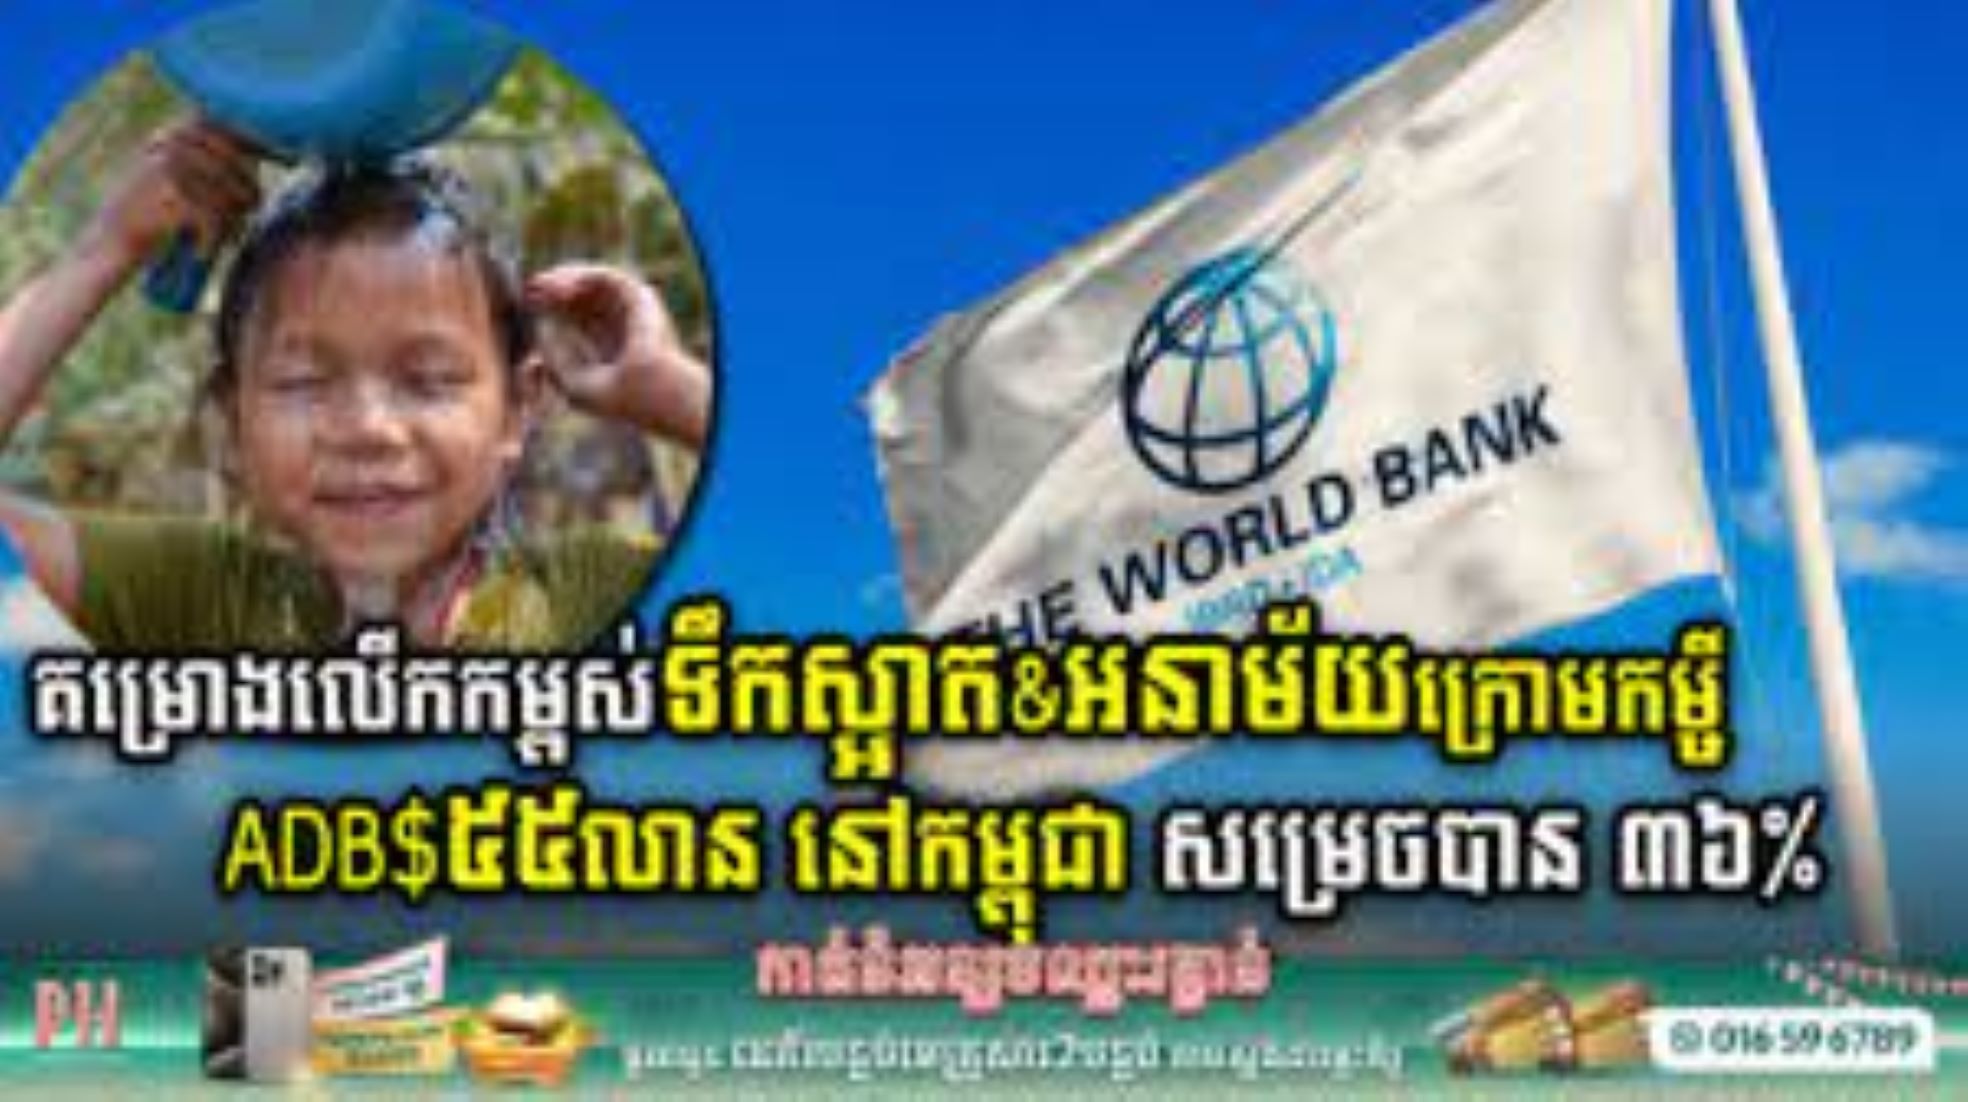 World Bank Approves 163 Million USD For Safe Water Supply, Sanitation Project In Cambodia